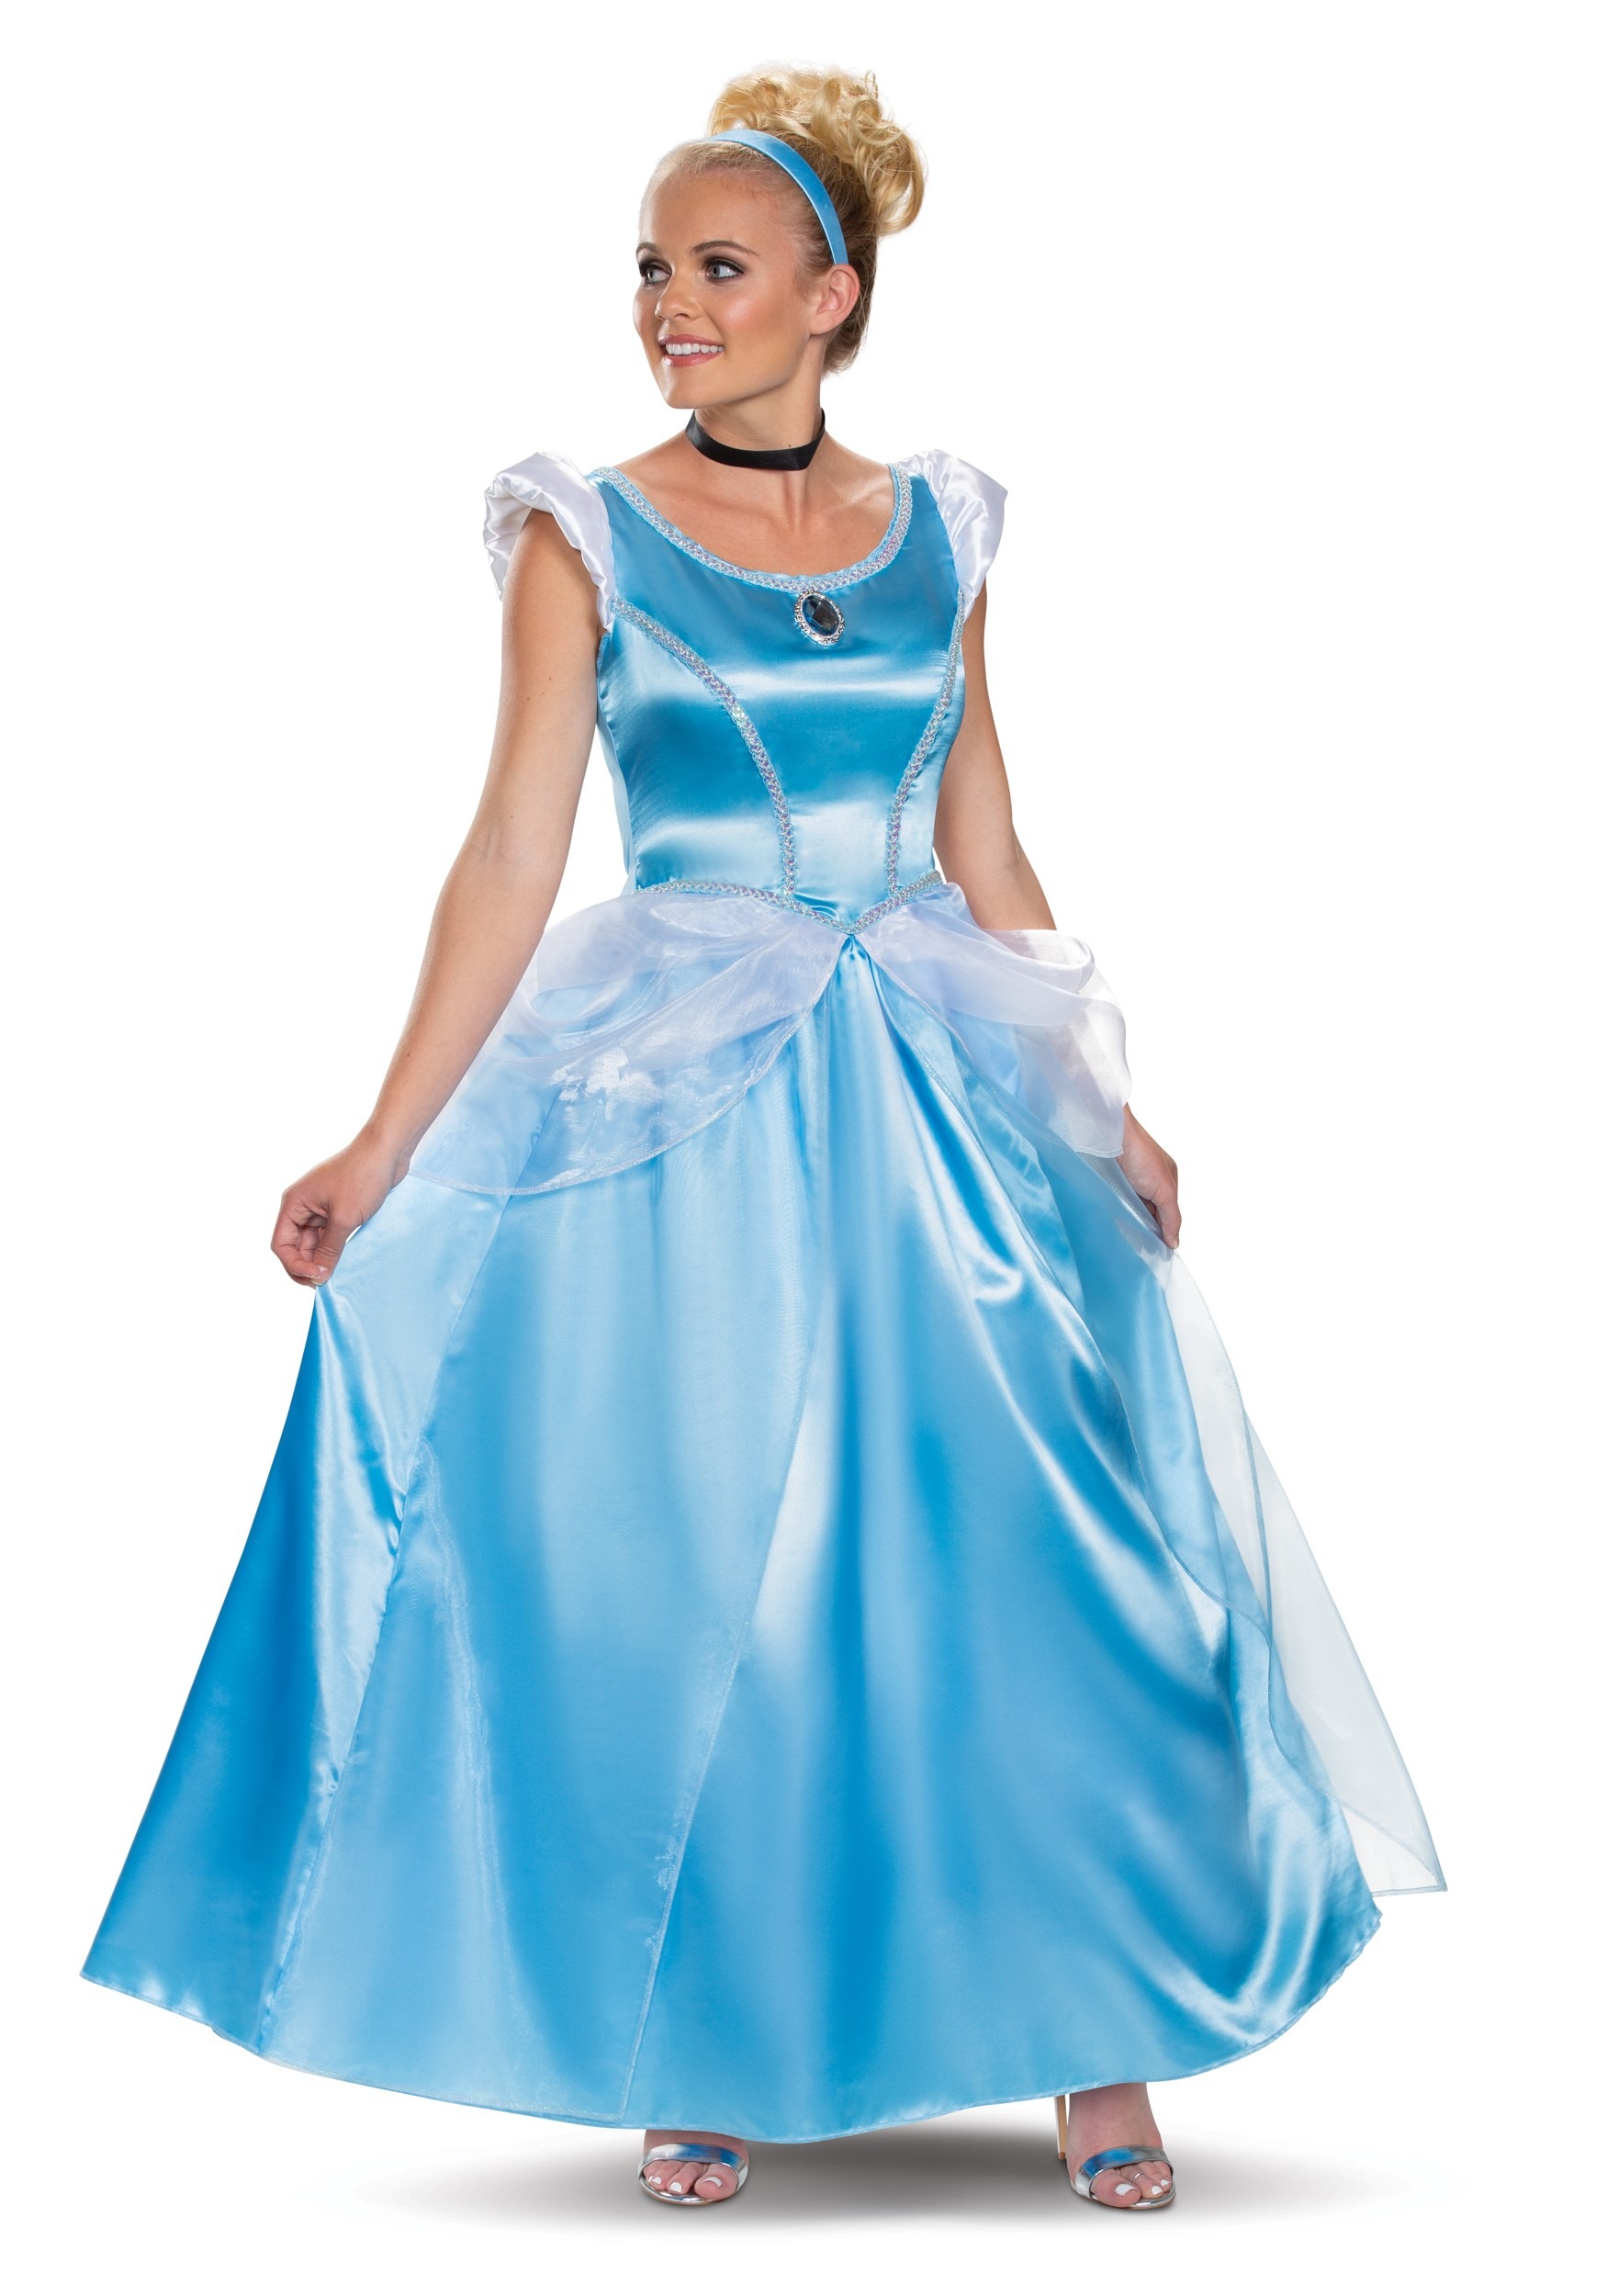 Image of Adult Deluxe Cinderella Costume ID DI103909-XL